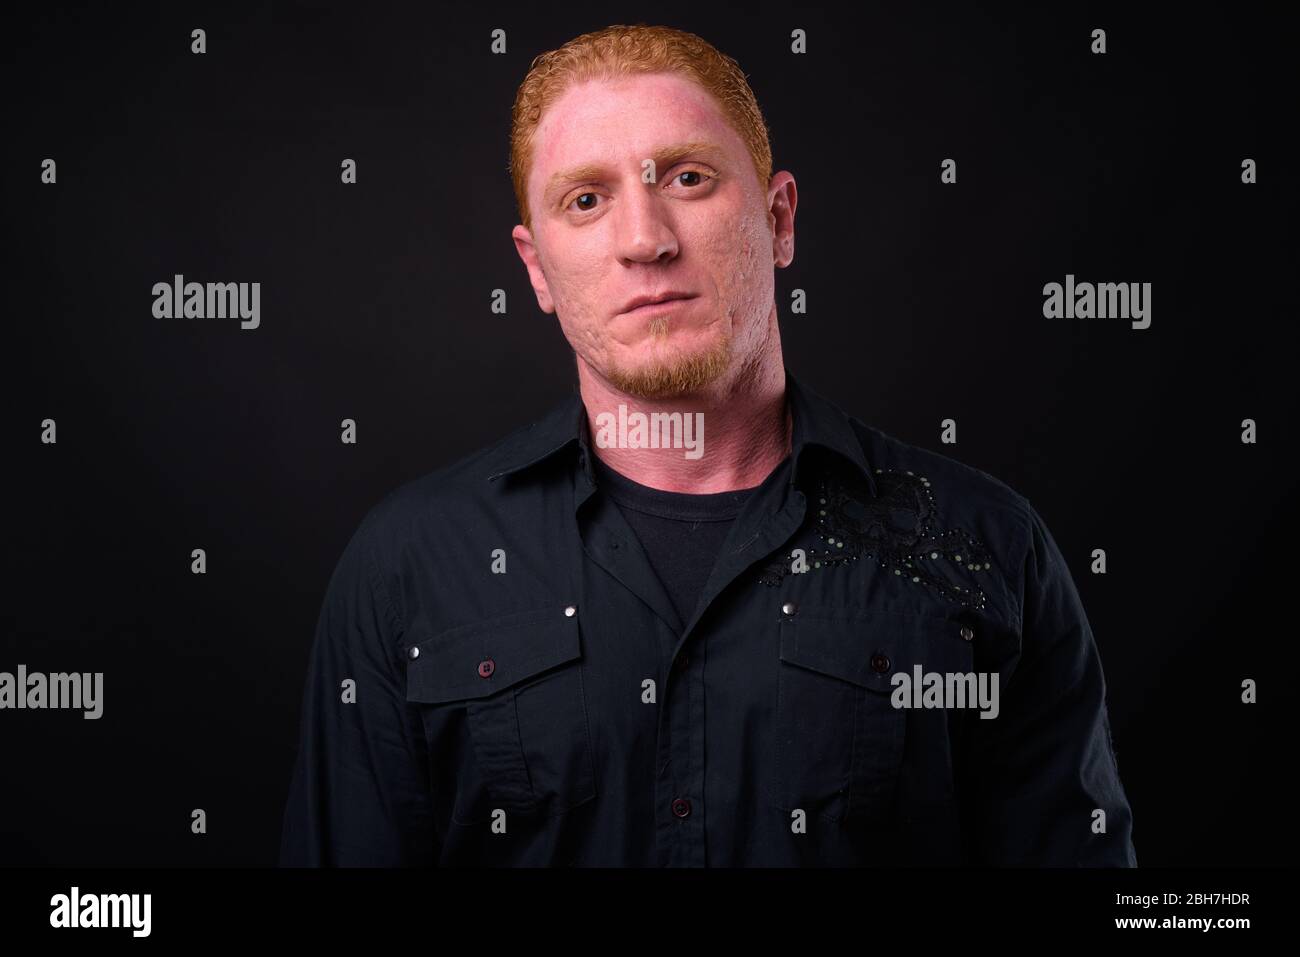 Portrait of muscular man with orange hair Stock Photo